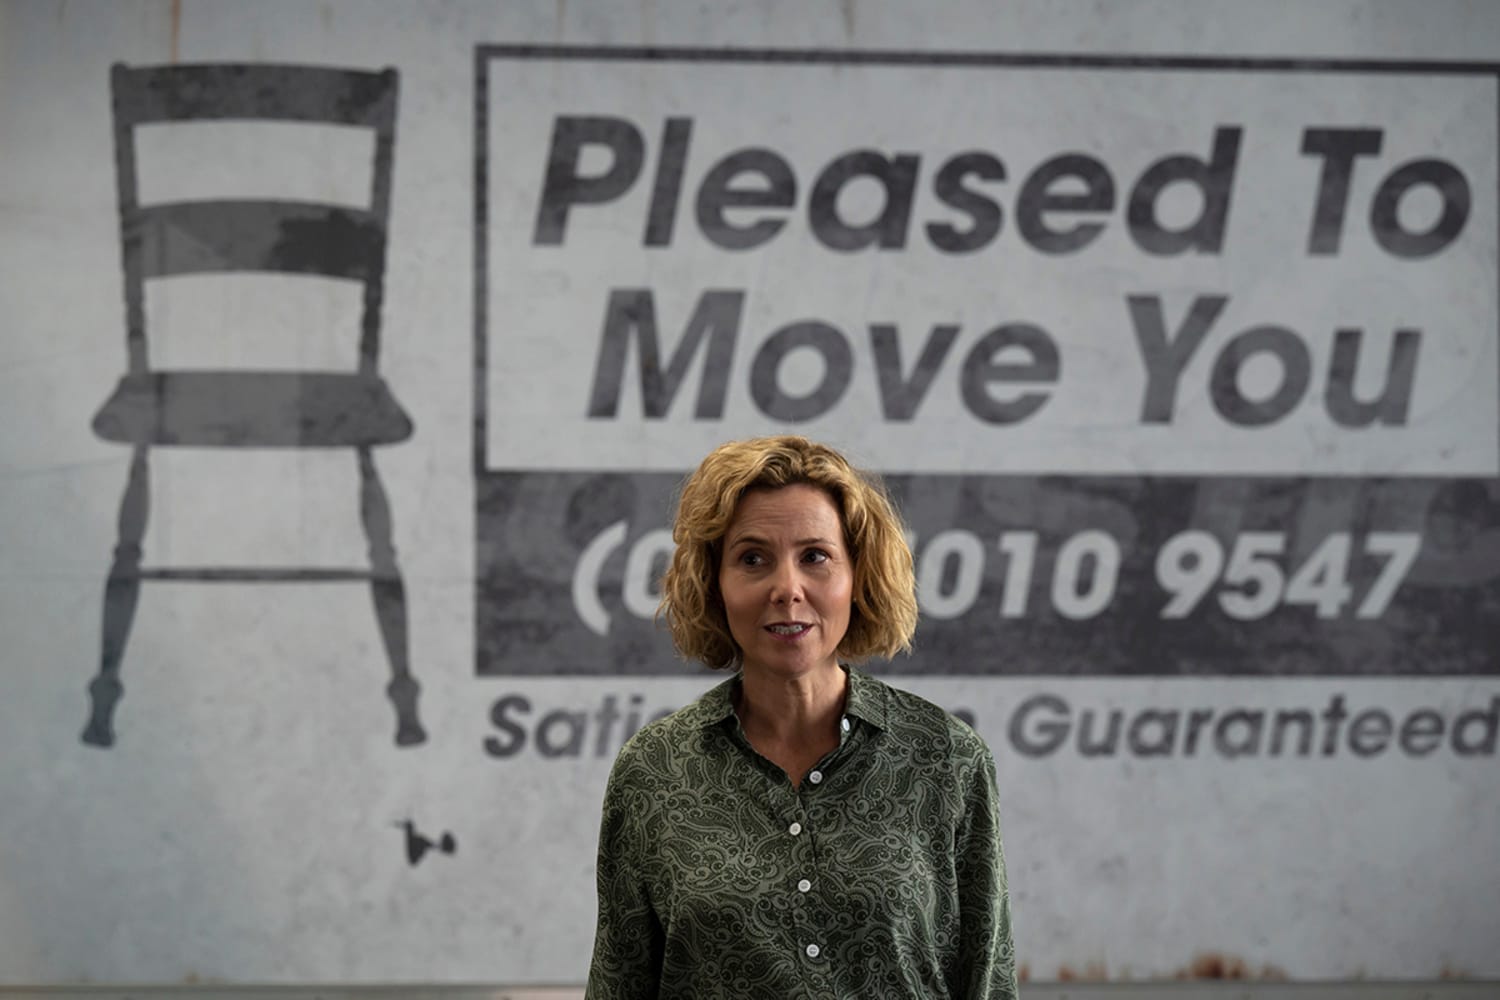 A woman with short, curly blonde hair stands speaking in front of a large business sign that reads: Pleased to Move You (partially covered phone number, "Satisfaction guaranteed" printed below). An image of a chair appears to the left of the business sign